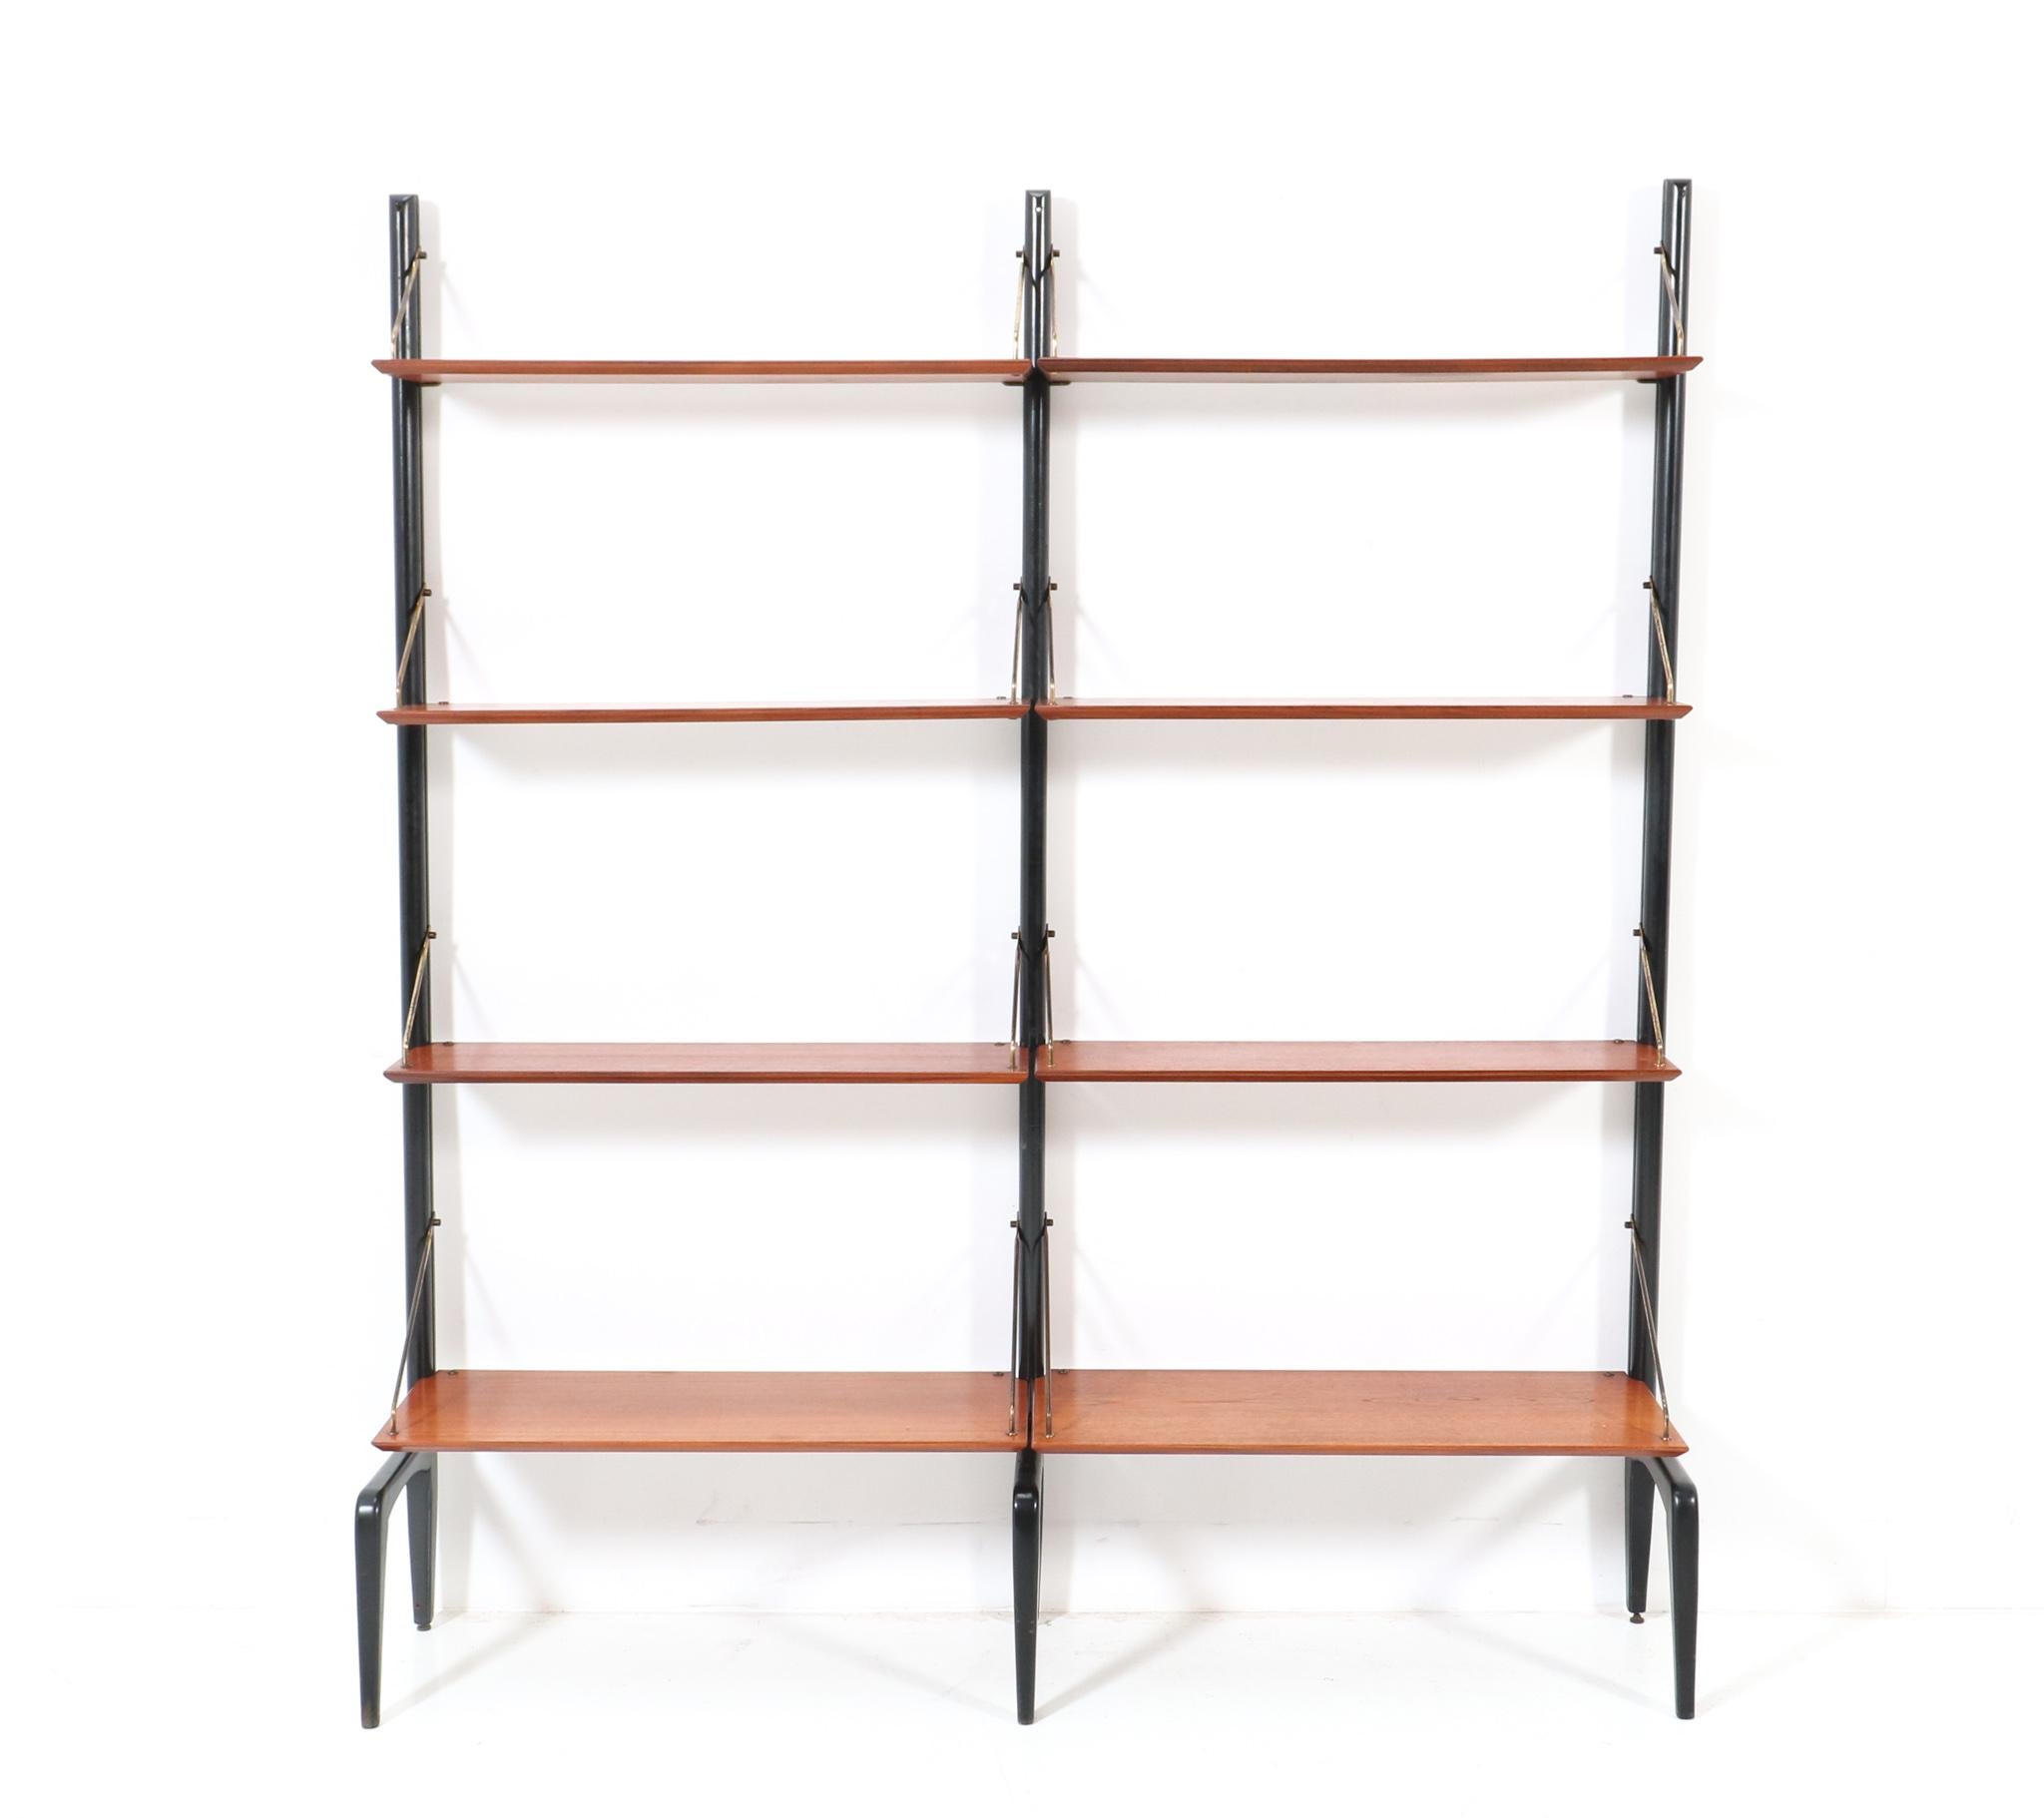 Stunning and rare Mid-Century Modern free standing wall unit.
Design by Louis van Teeffelen for WéBé.
Striking Dutch design from the 1950s.
This wonderful Mid-Century Modern wall unit by Louis van Teeffelen for WéBé consists of:
Three original